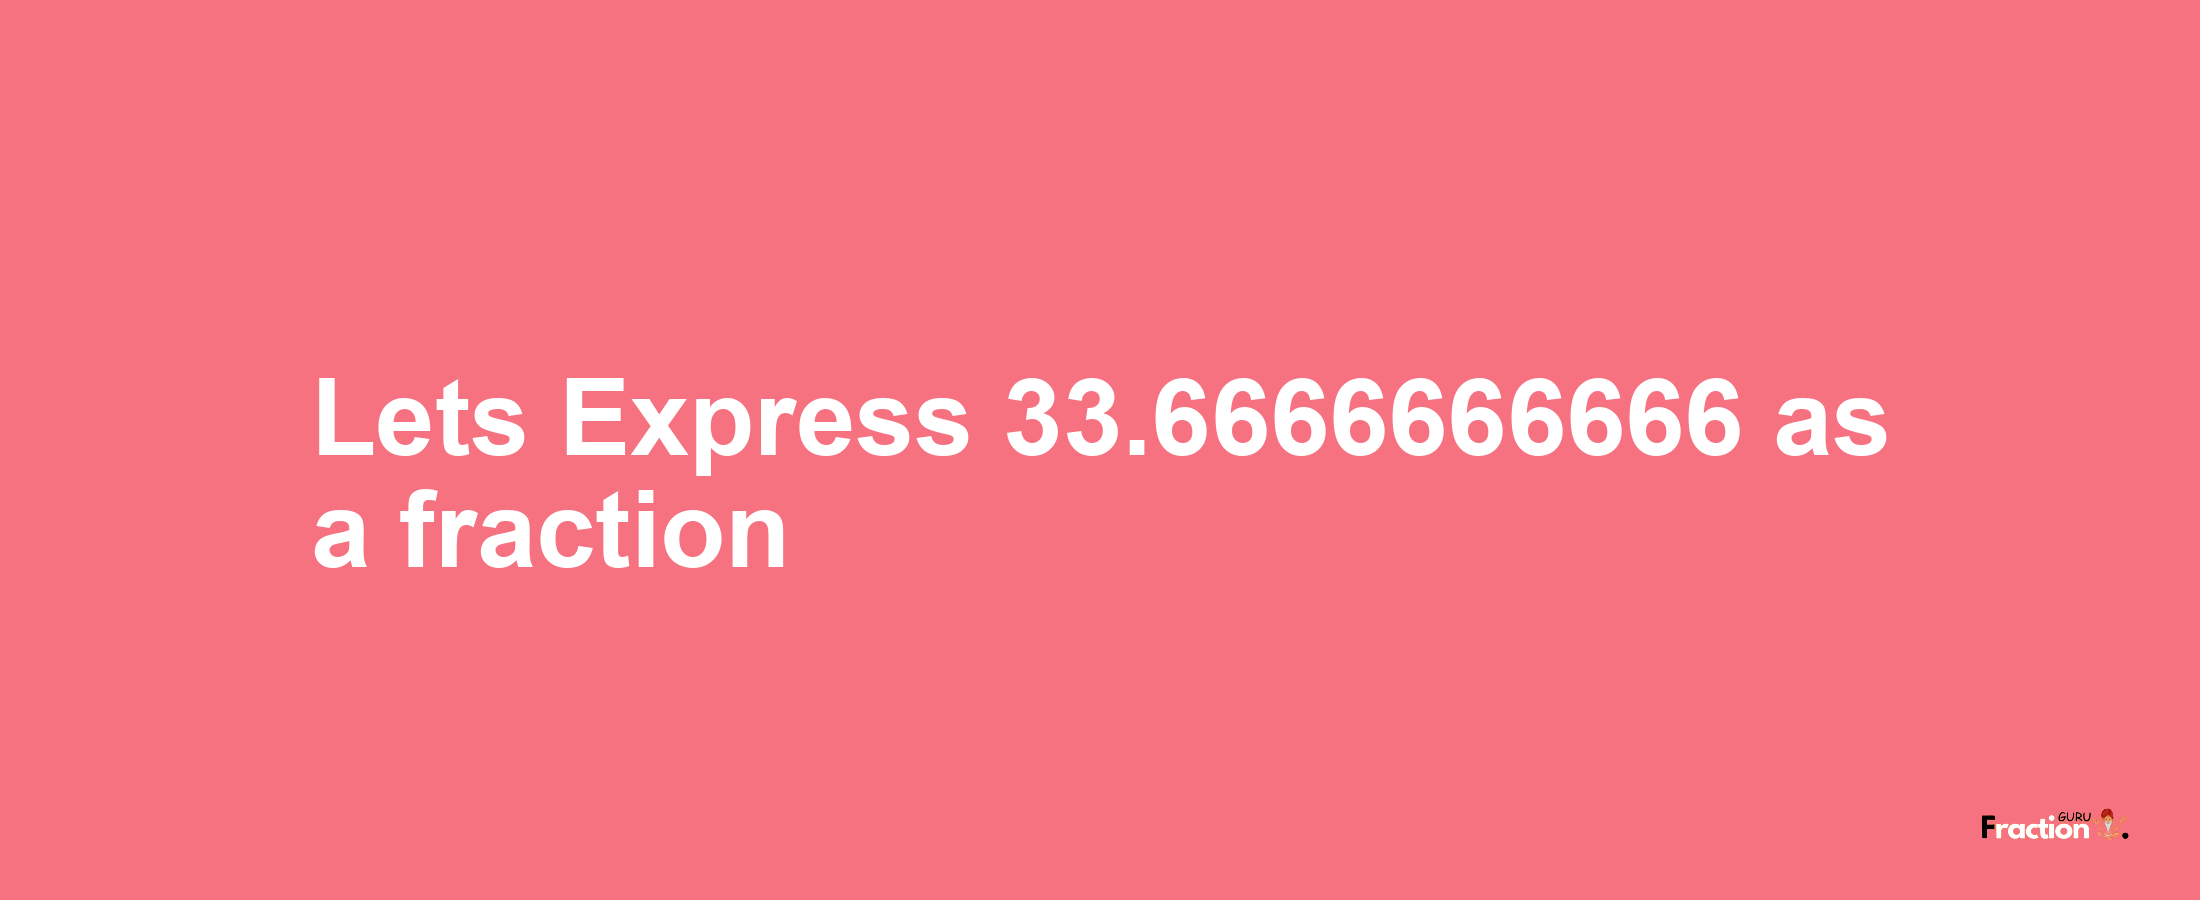 Lets Express 33.6666666666 as afraction